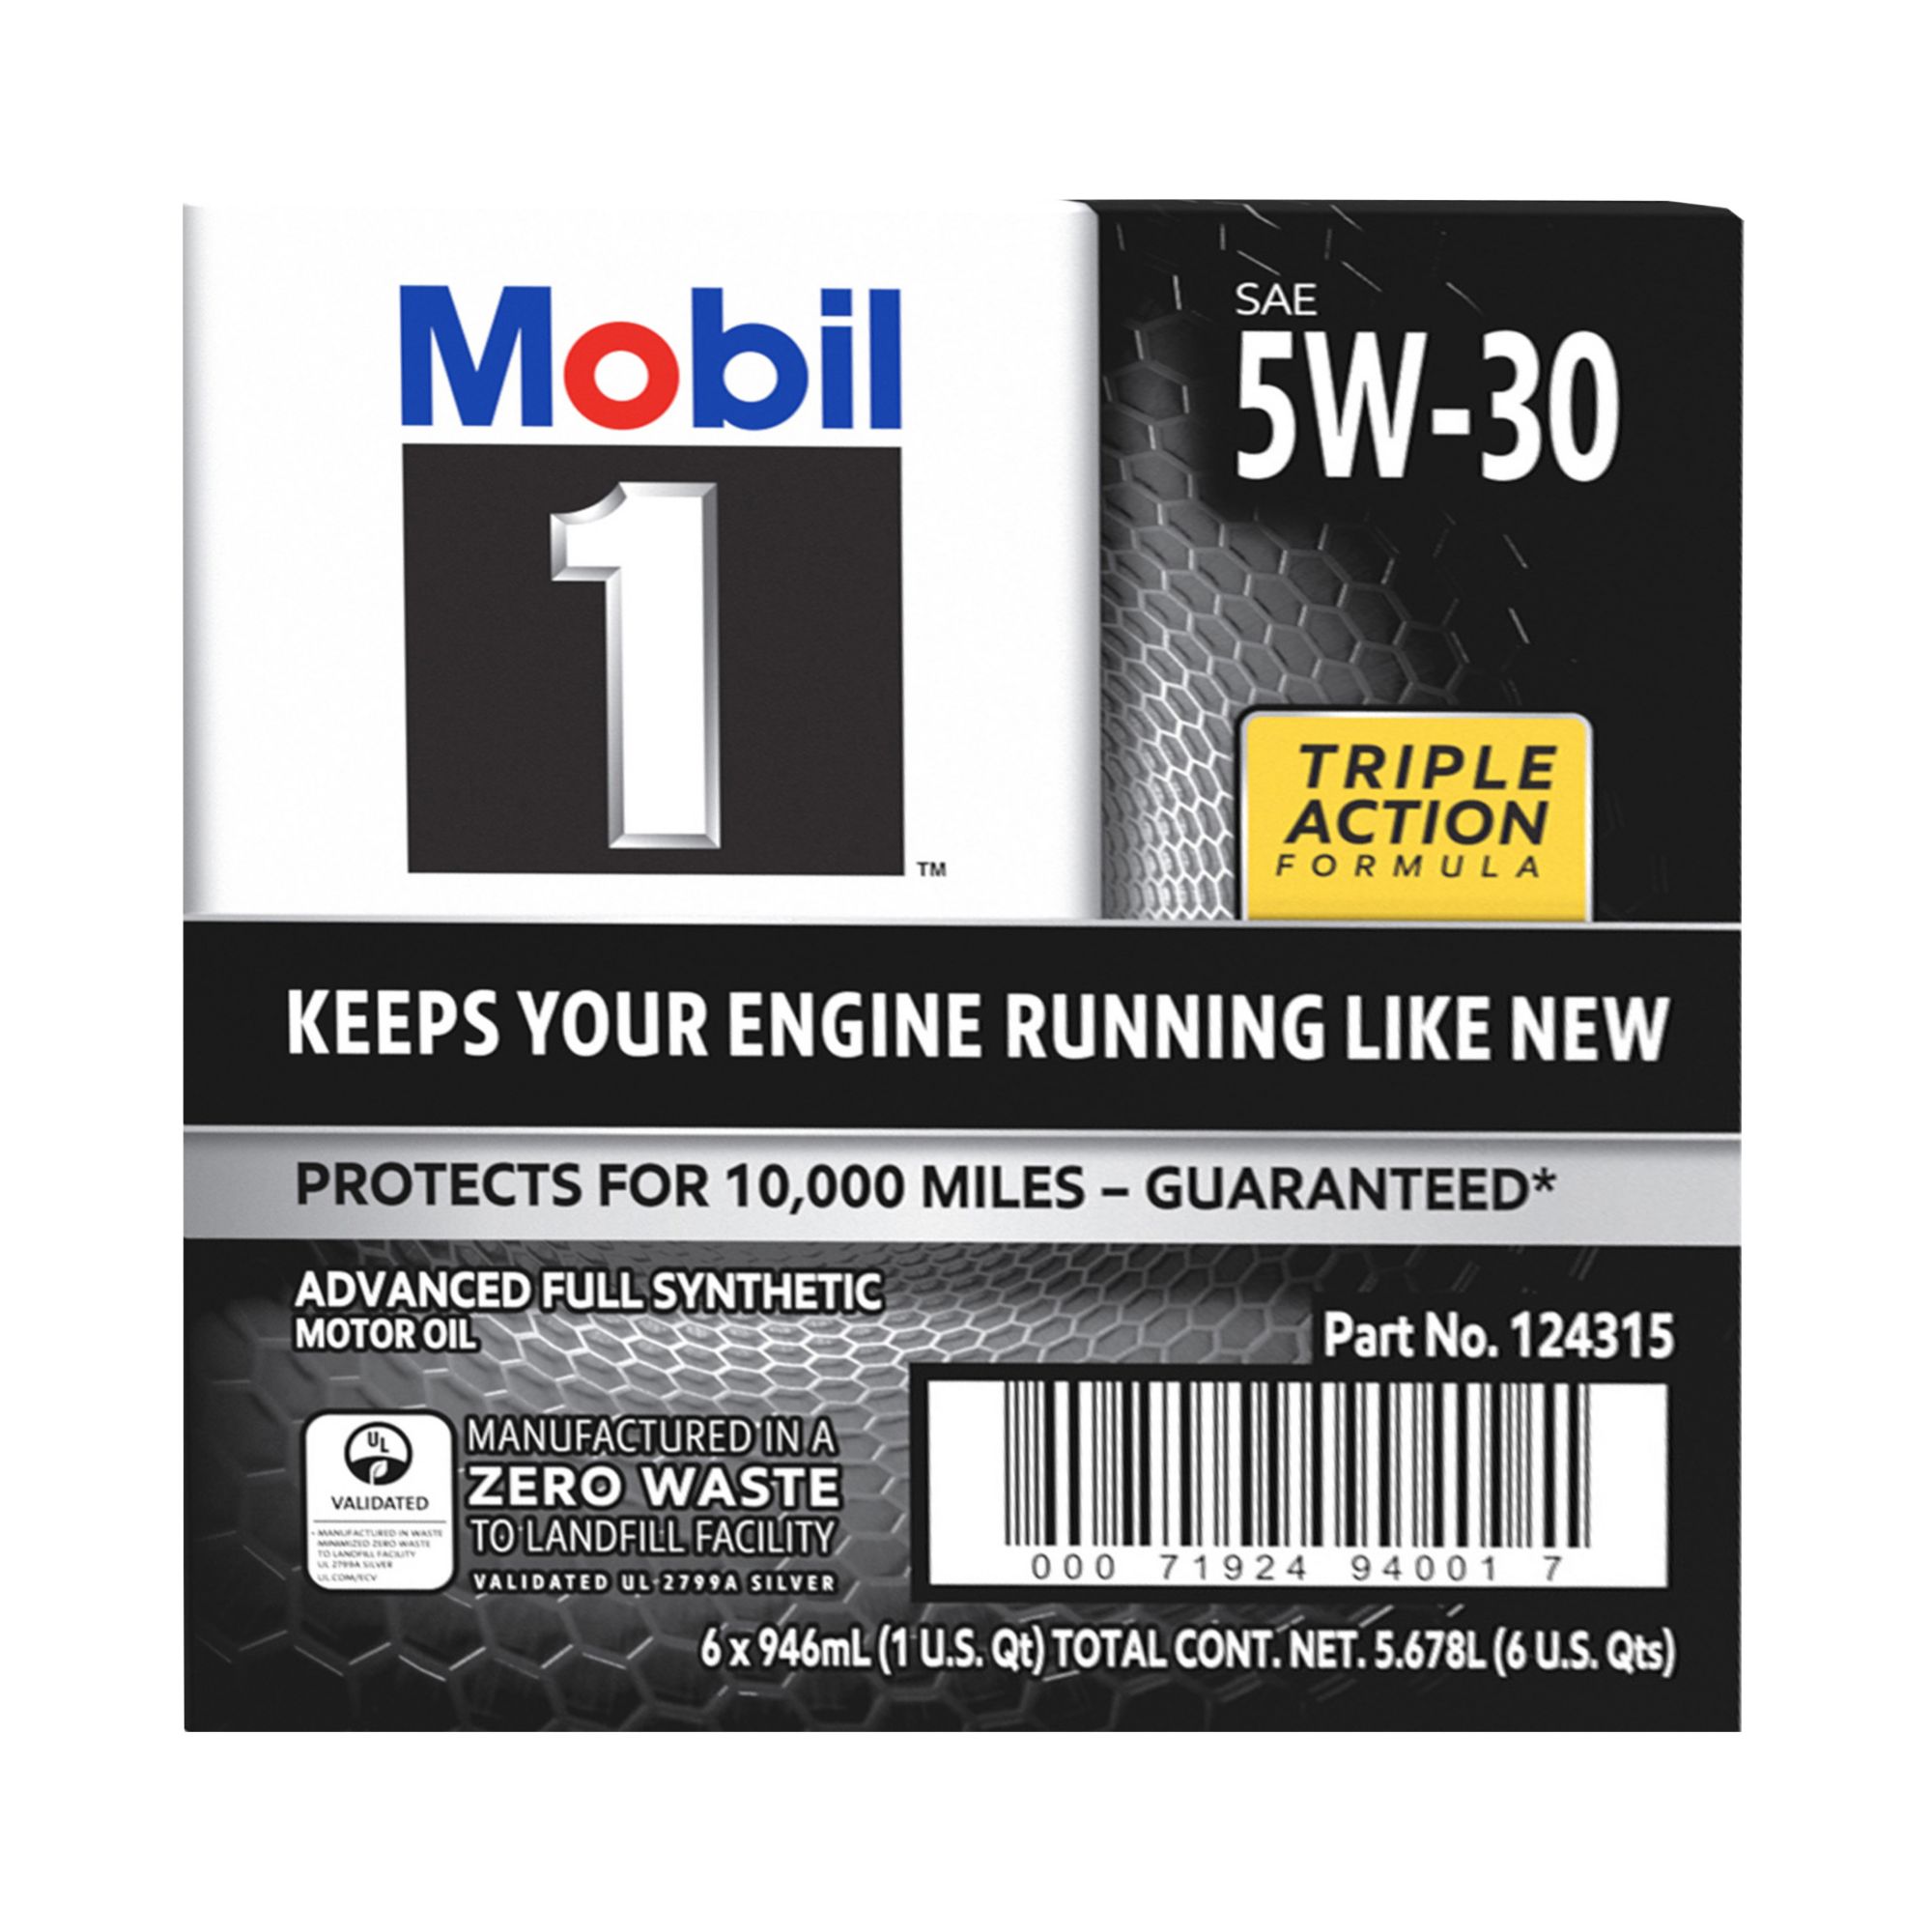 5W30 Engine Oil - The Right Oil For My Car?